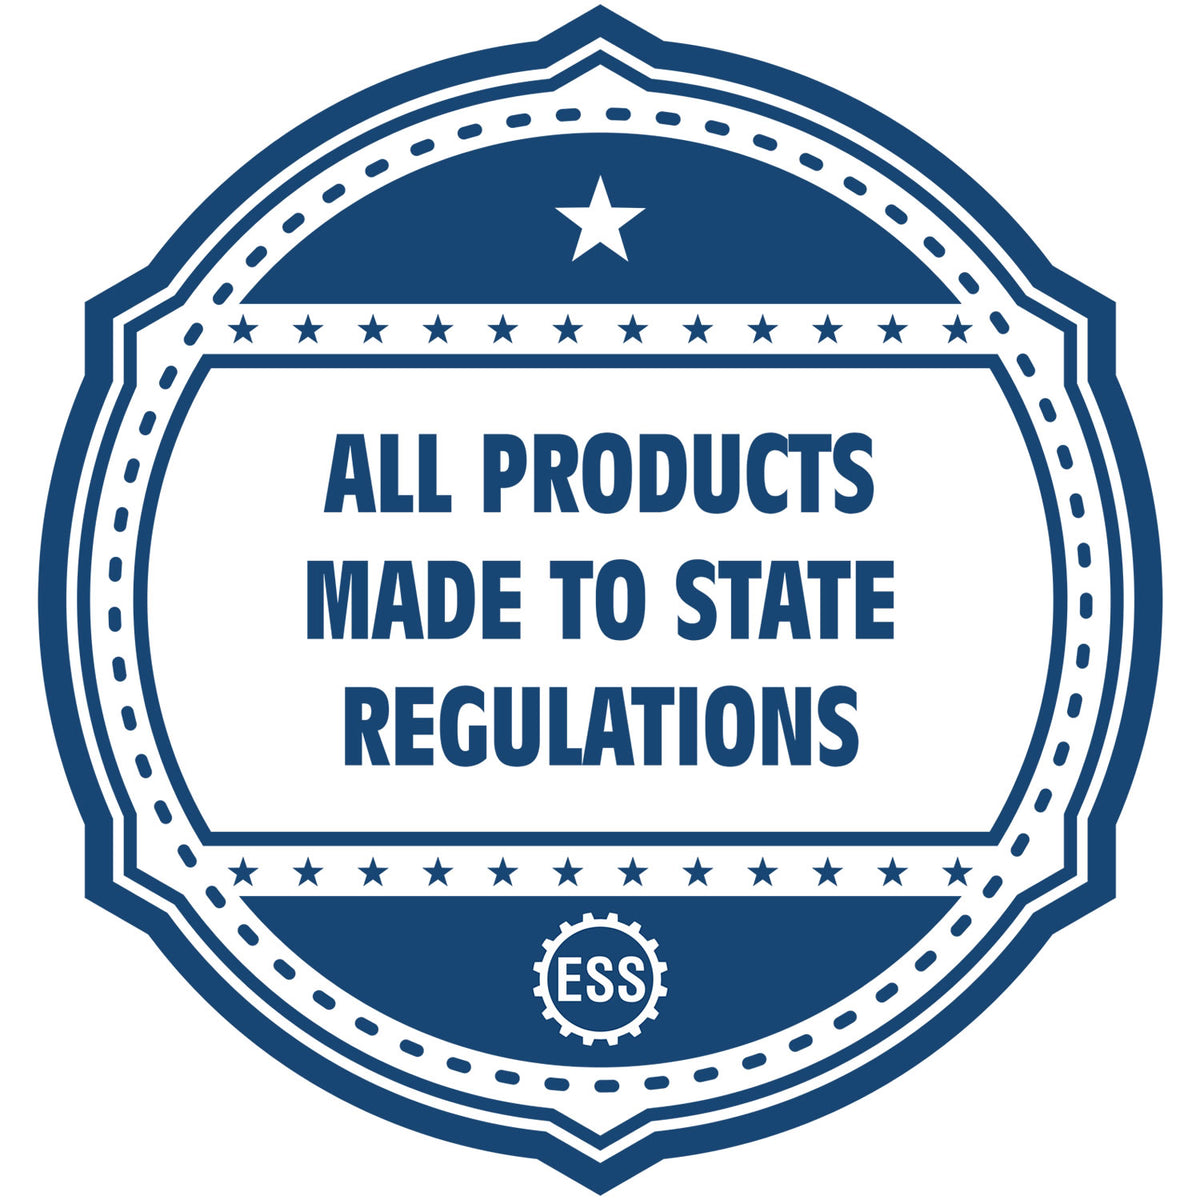 An icon or badge element for the Soft Pocket Vermont Landscape Architect Embosser showing that this product is made in compliance with state regulations.